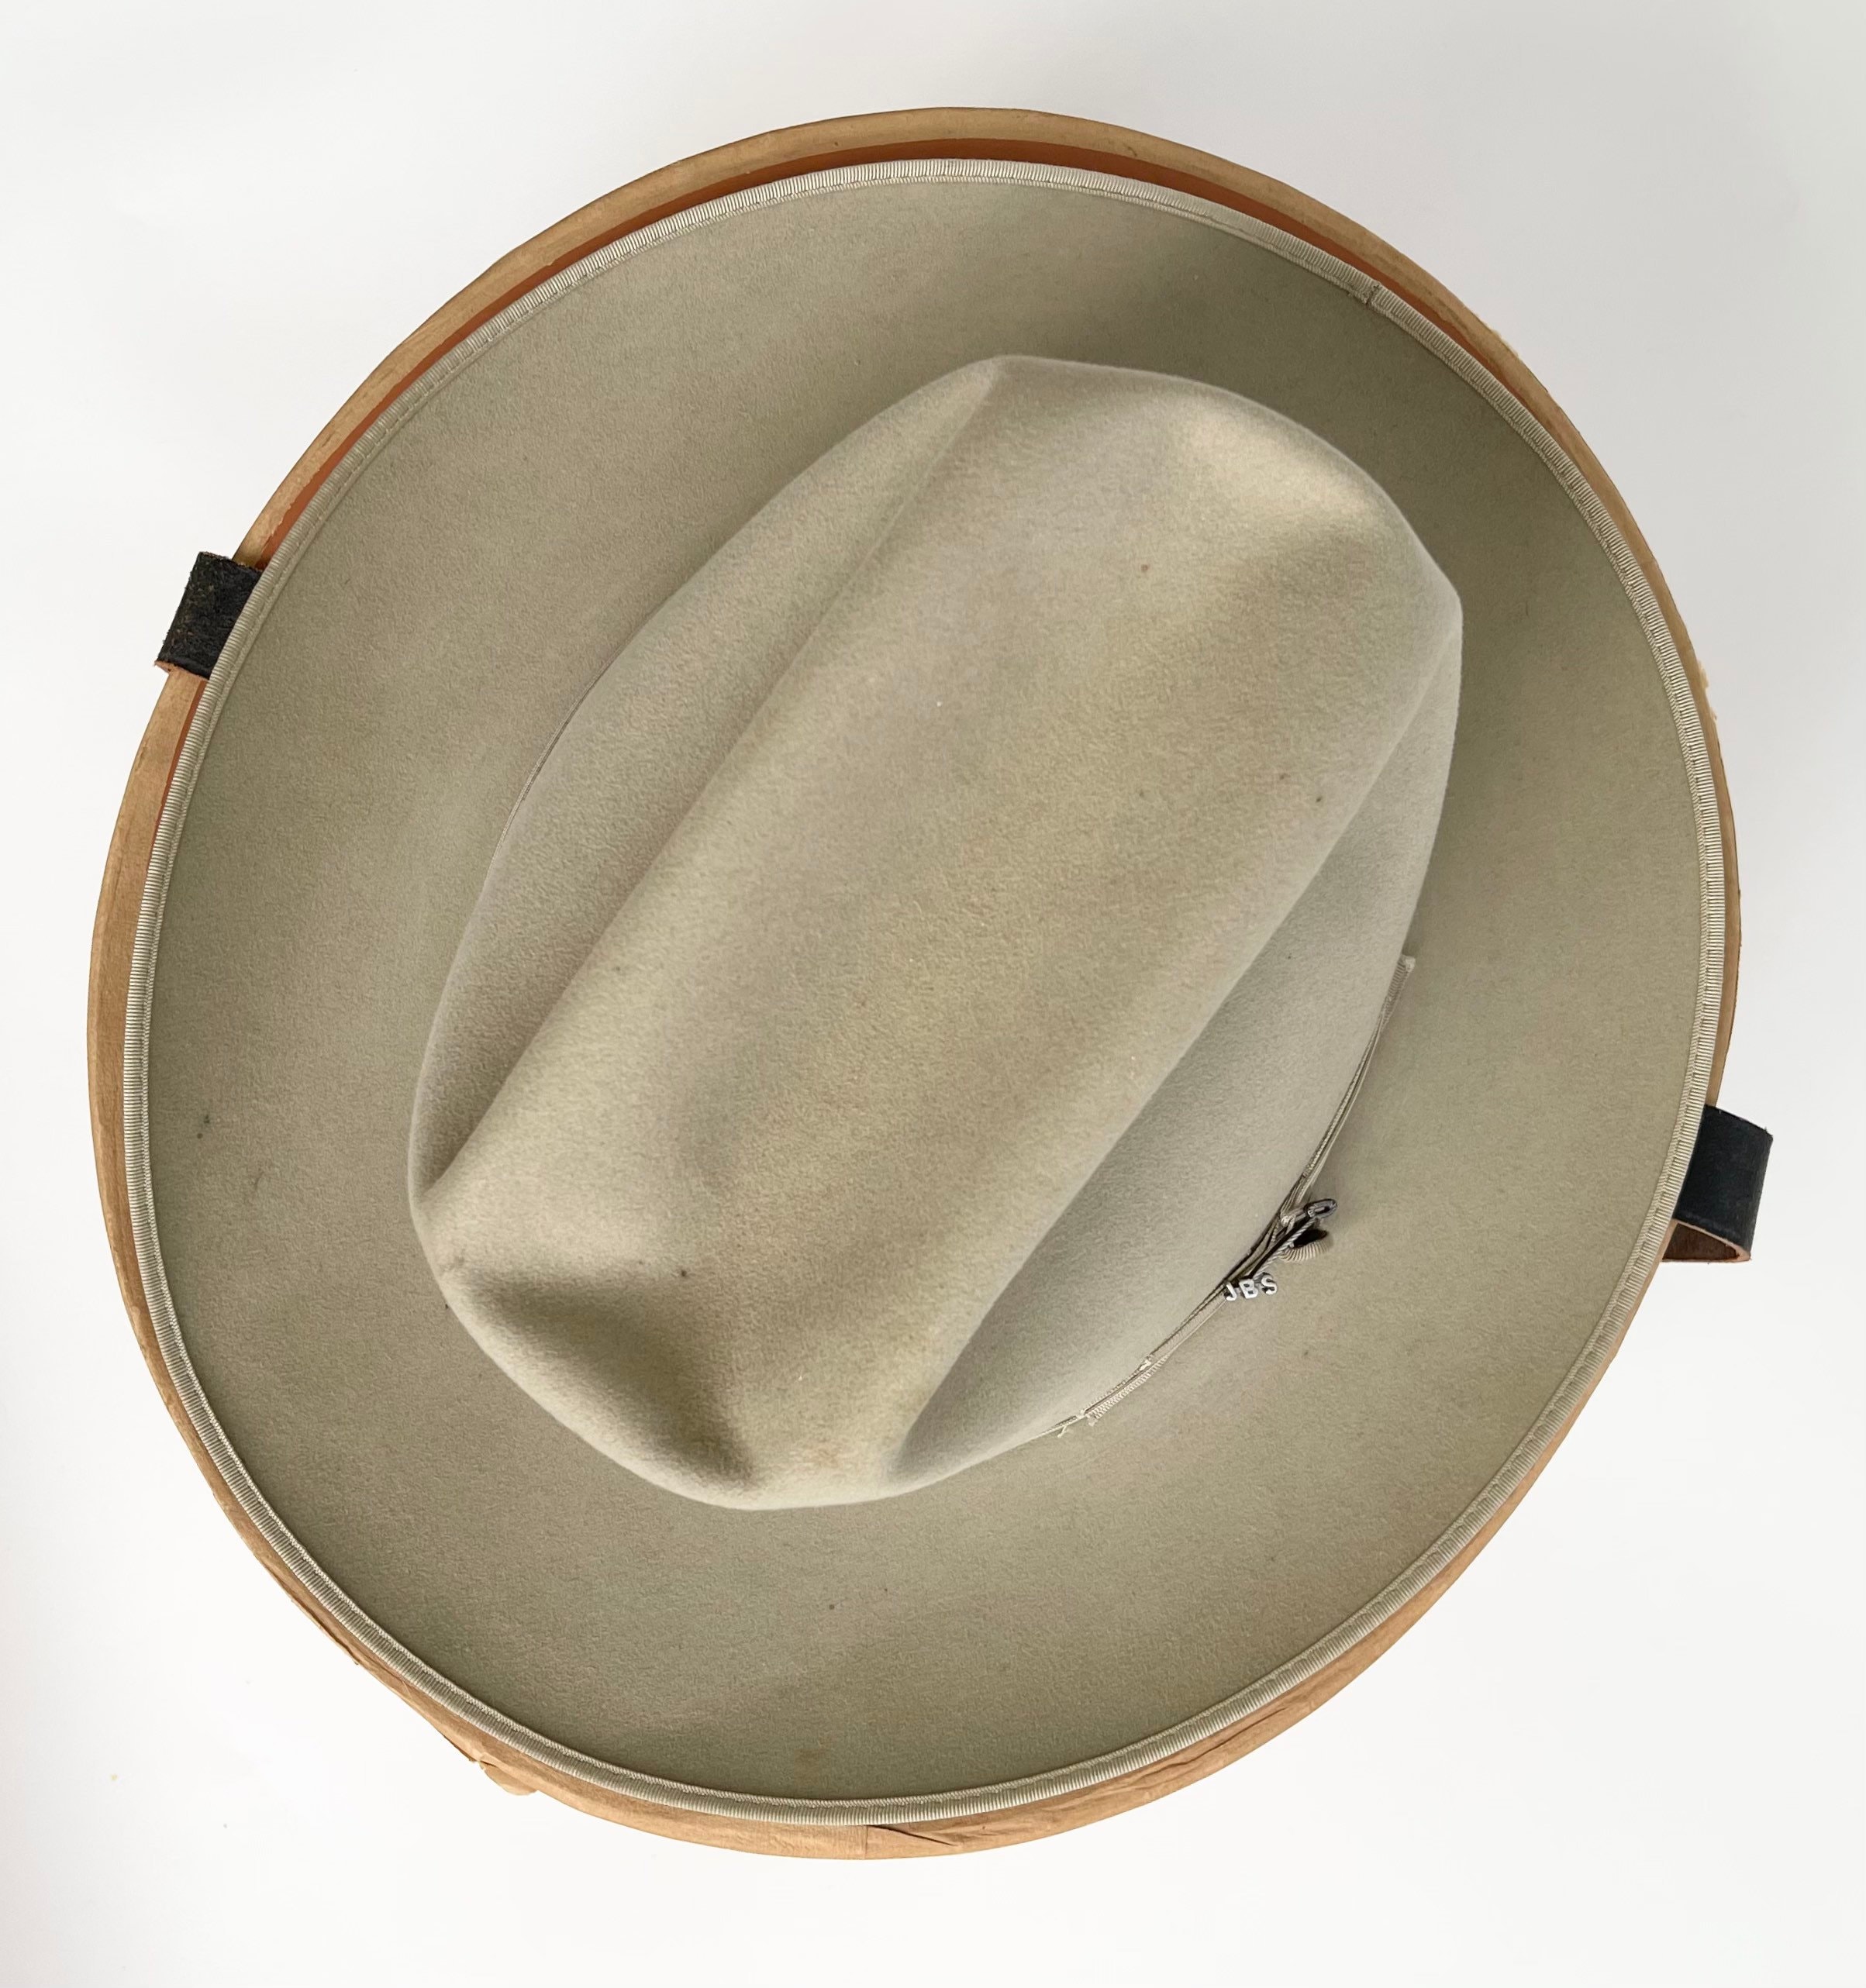 Stetson Cowboy Hat Fedora With Hat Box And Jbs Branding Iron Hat Pin